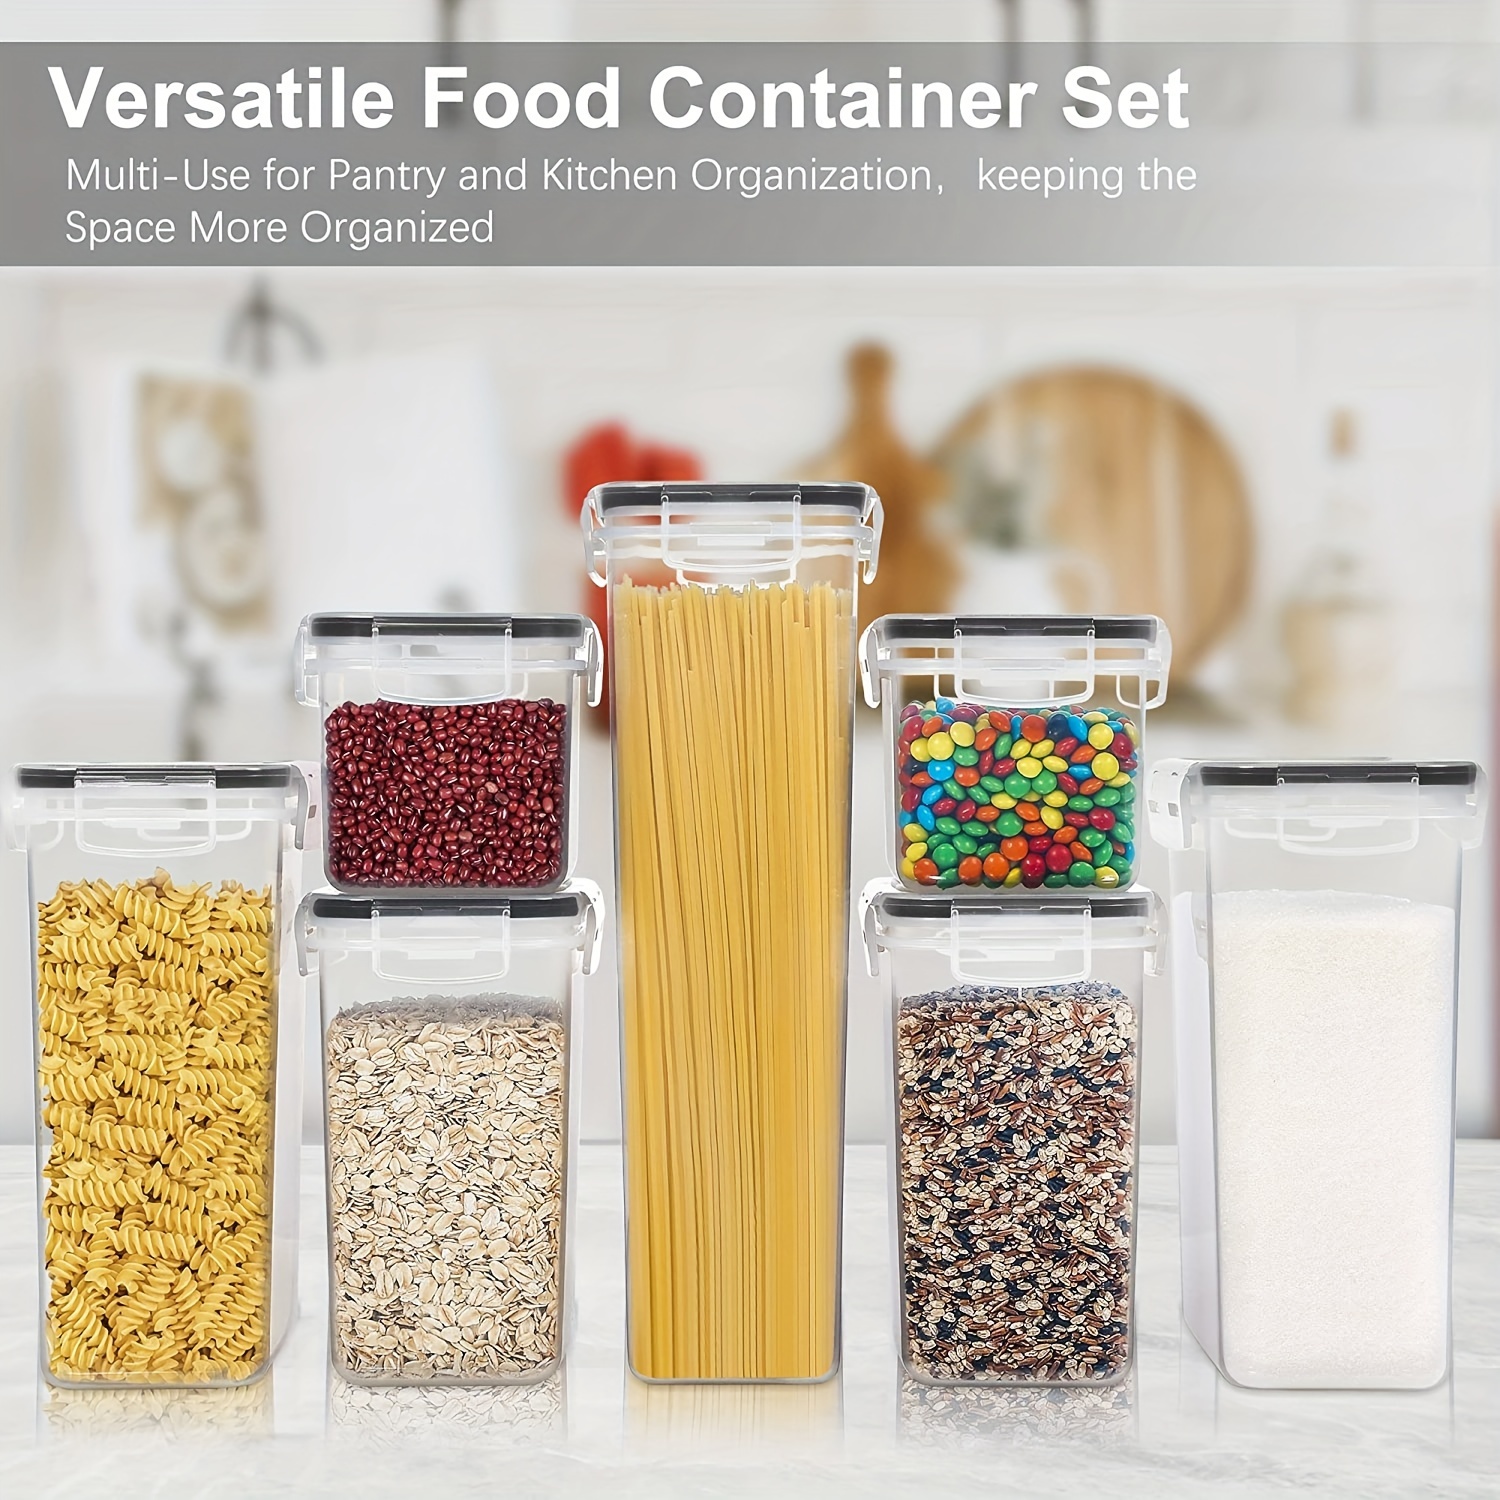 Vtopmart Airtight Food Storage Containers with Lids, 4 Pcs 2.8L Pasta Containers for Pantry Organization and Storage, BPA Free Kitchen Storage